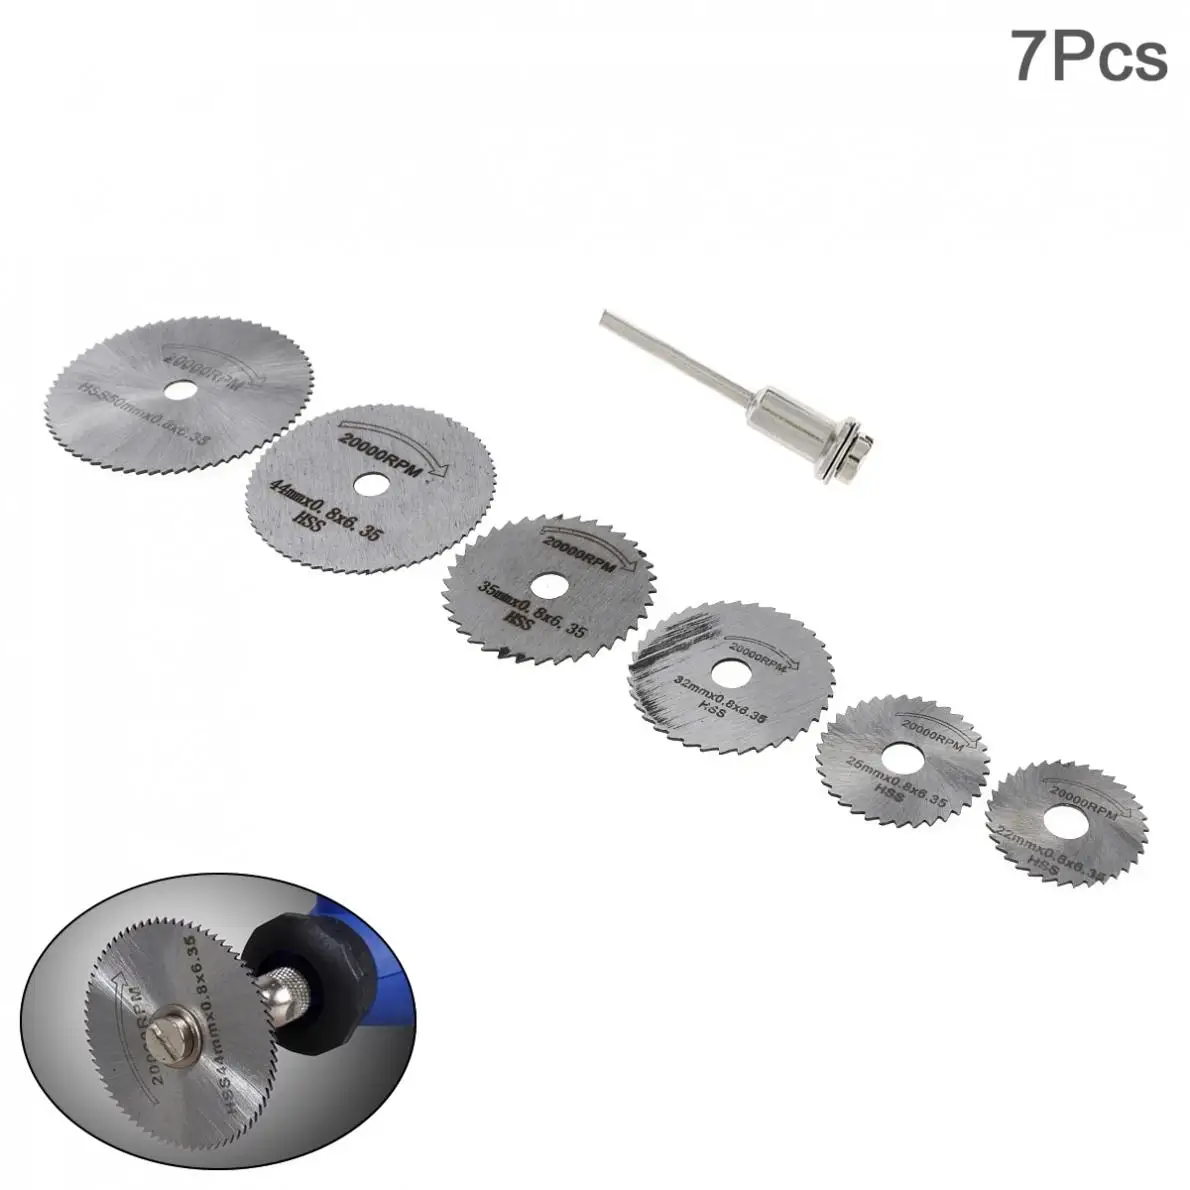 7pcs/lot Mini Wood Saw Blade Circular Blade Jig Saw Rotary Tool for Cutter Power Tool Set Wood Cutting Discs mini hobby table saw handmade woodworking bench saw diy wood model crafts cutting tool with power adapter hss saw blade 3800rpm